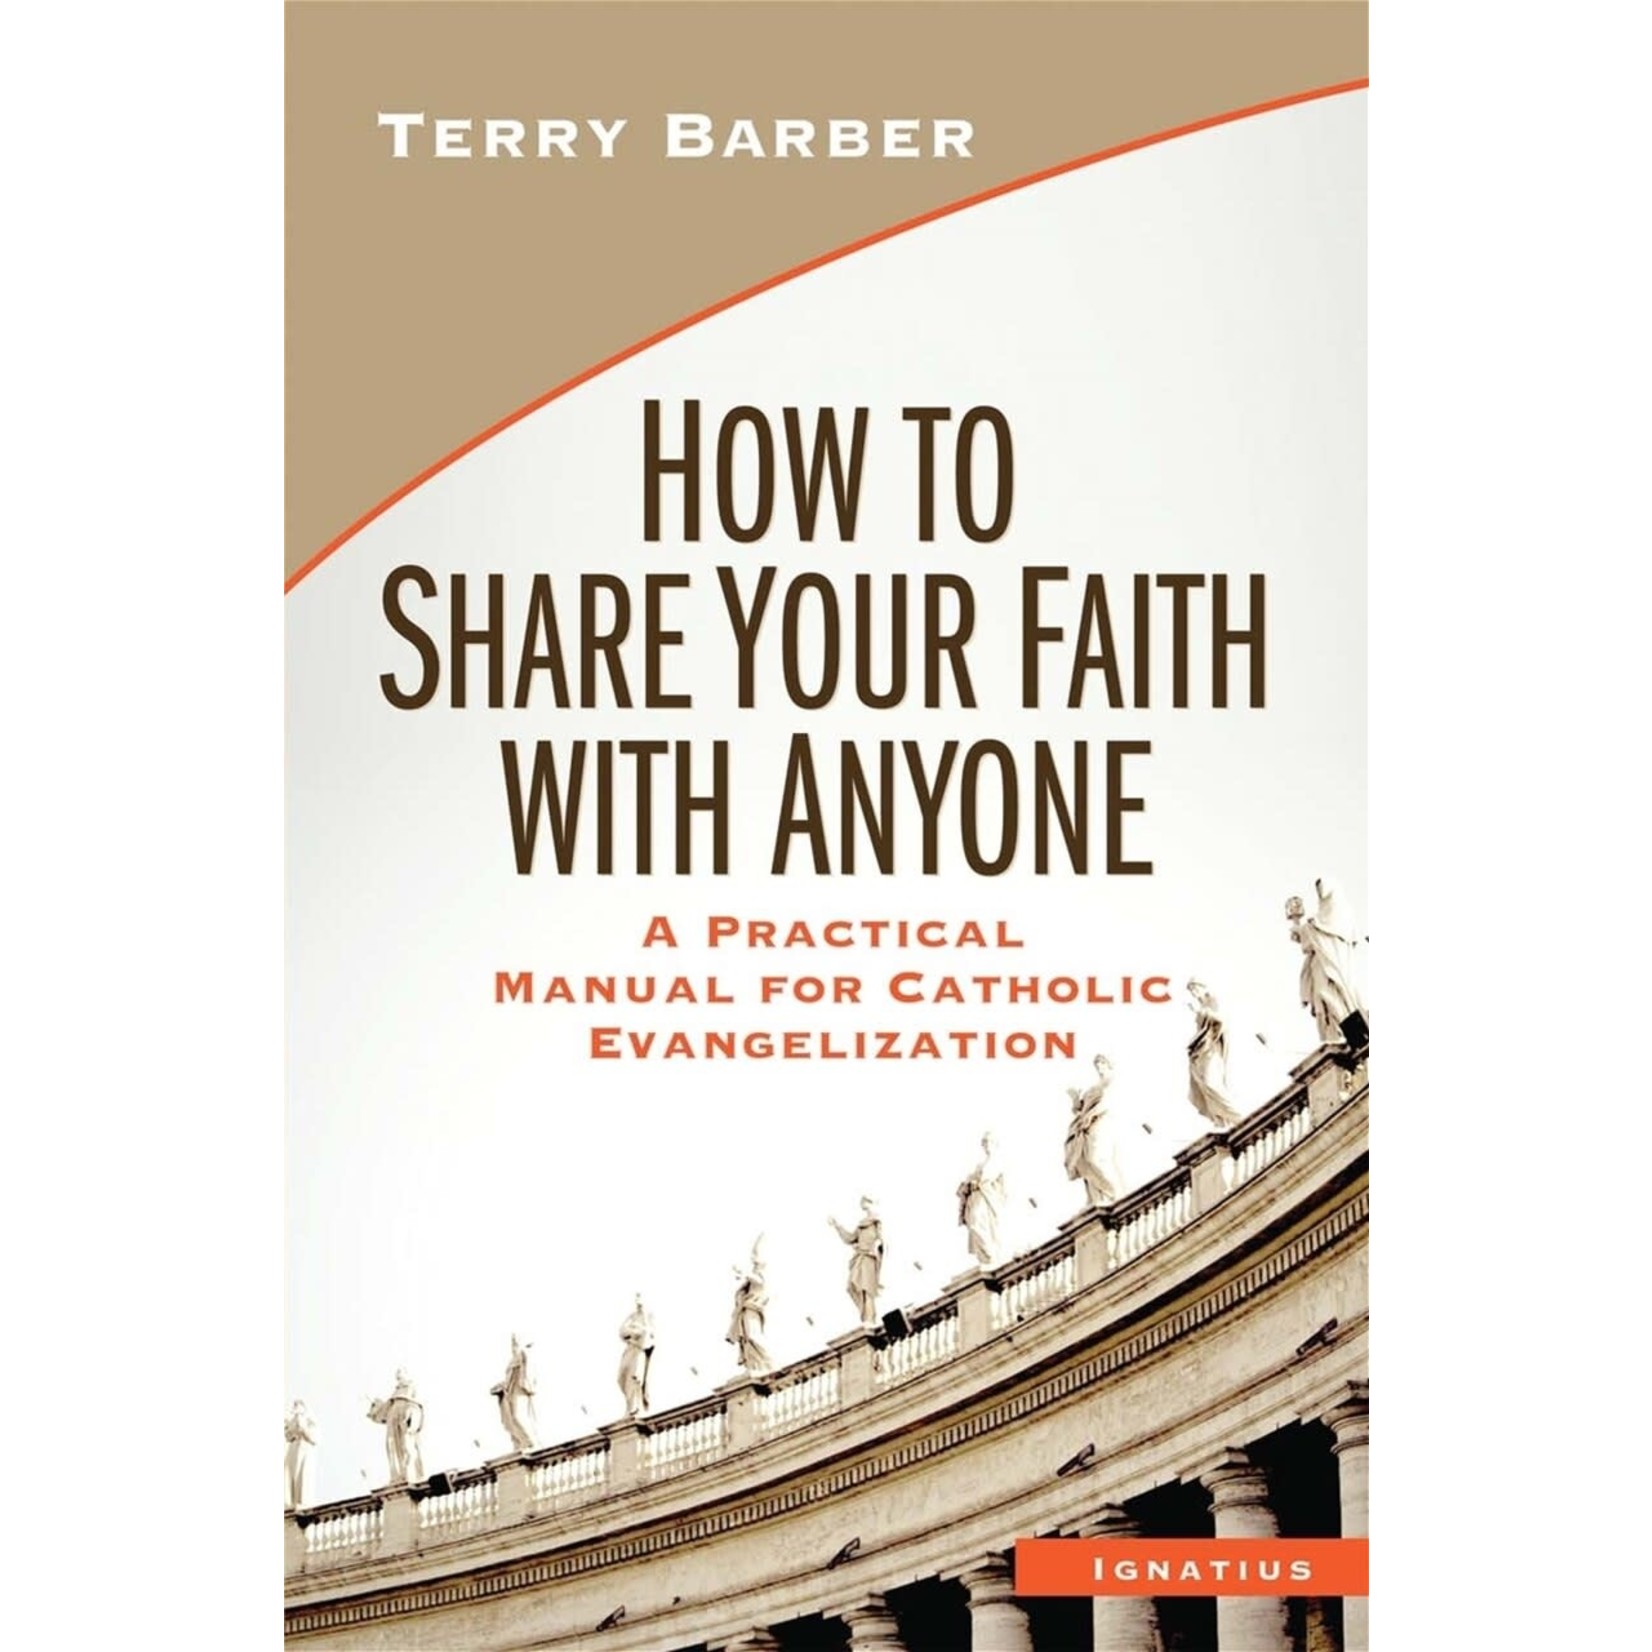 How to Share Your Faith With Anyone A Practical Manual for Catholic Evangelization